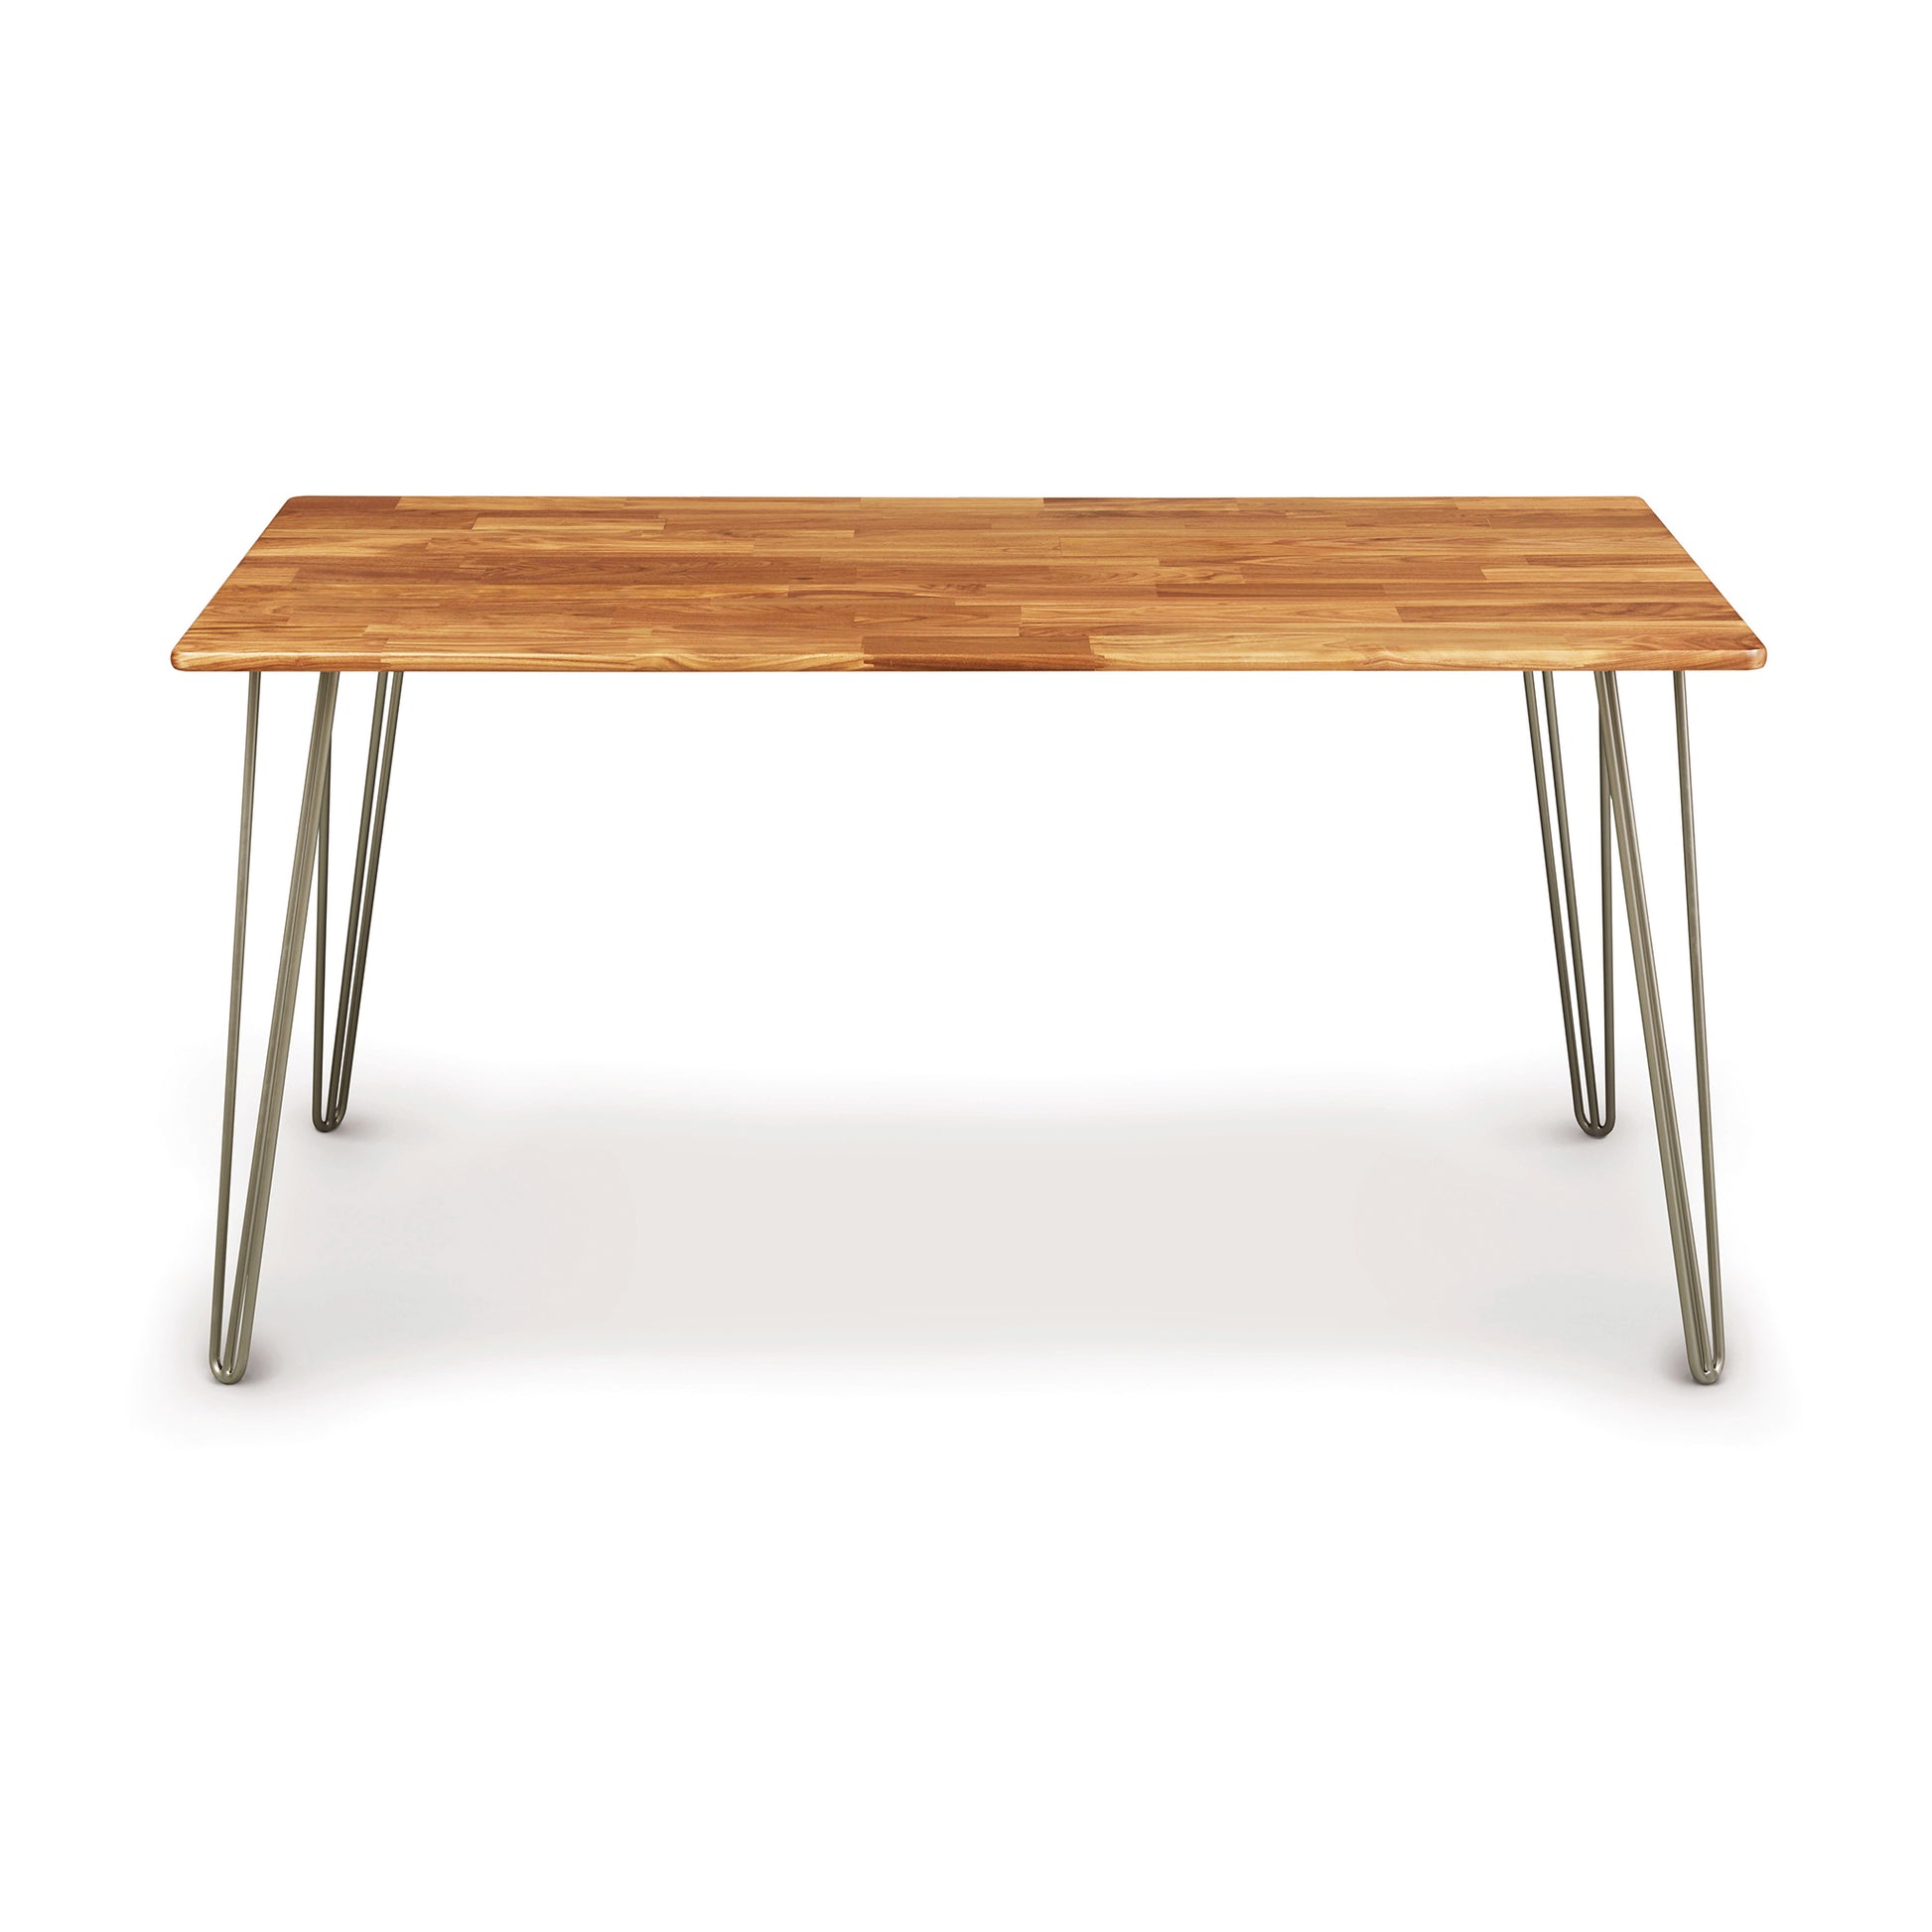 A Copeland Furniture Essentials Rectangle Dining Table with metal legs.